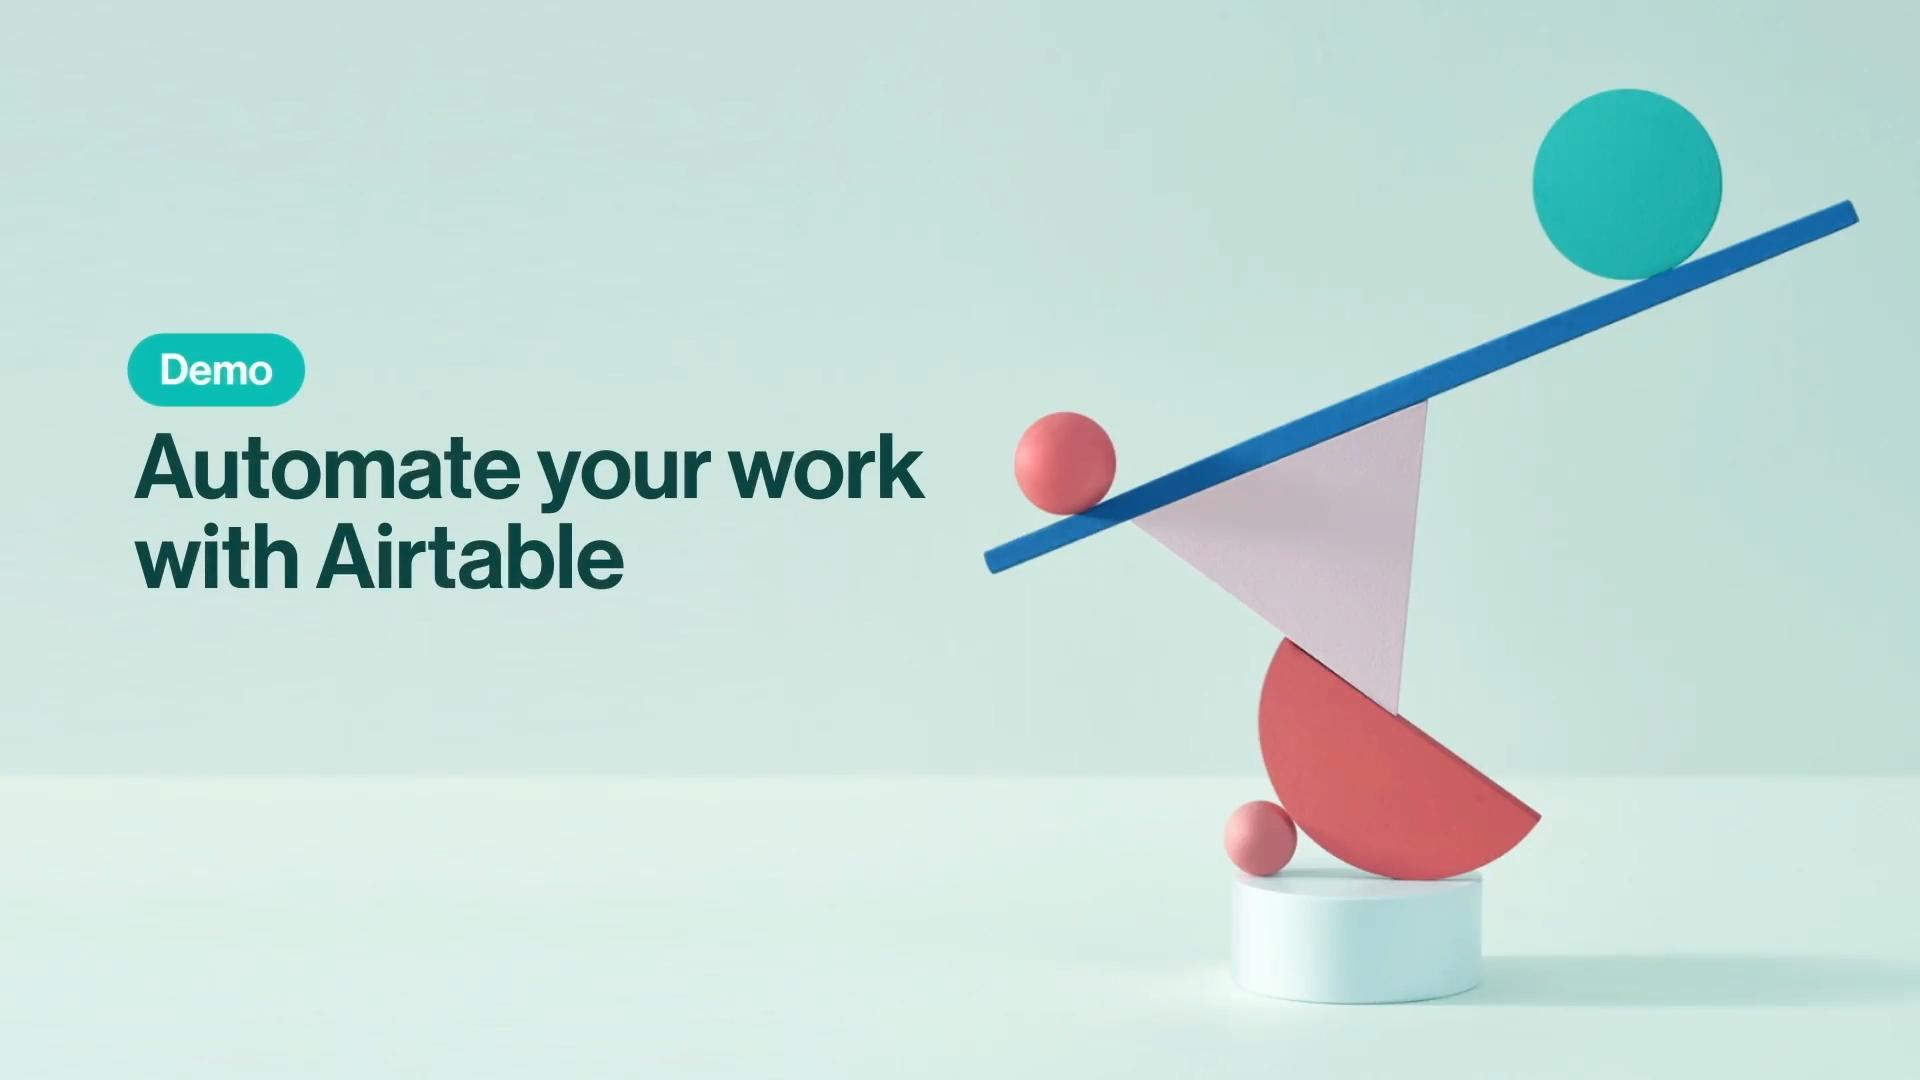 Demo: Automate your work with Airtable